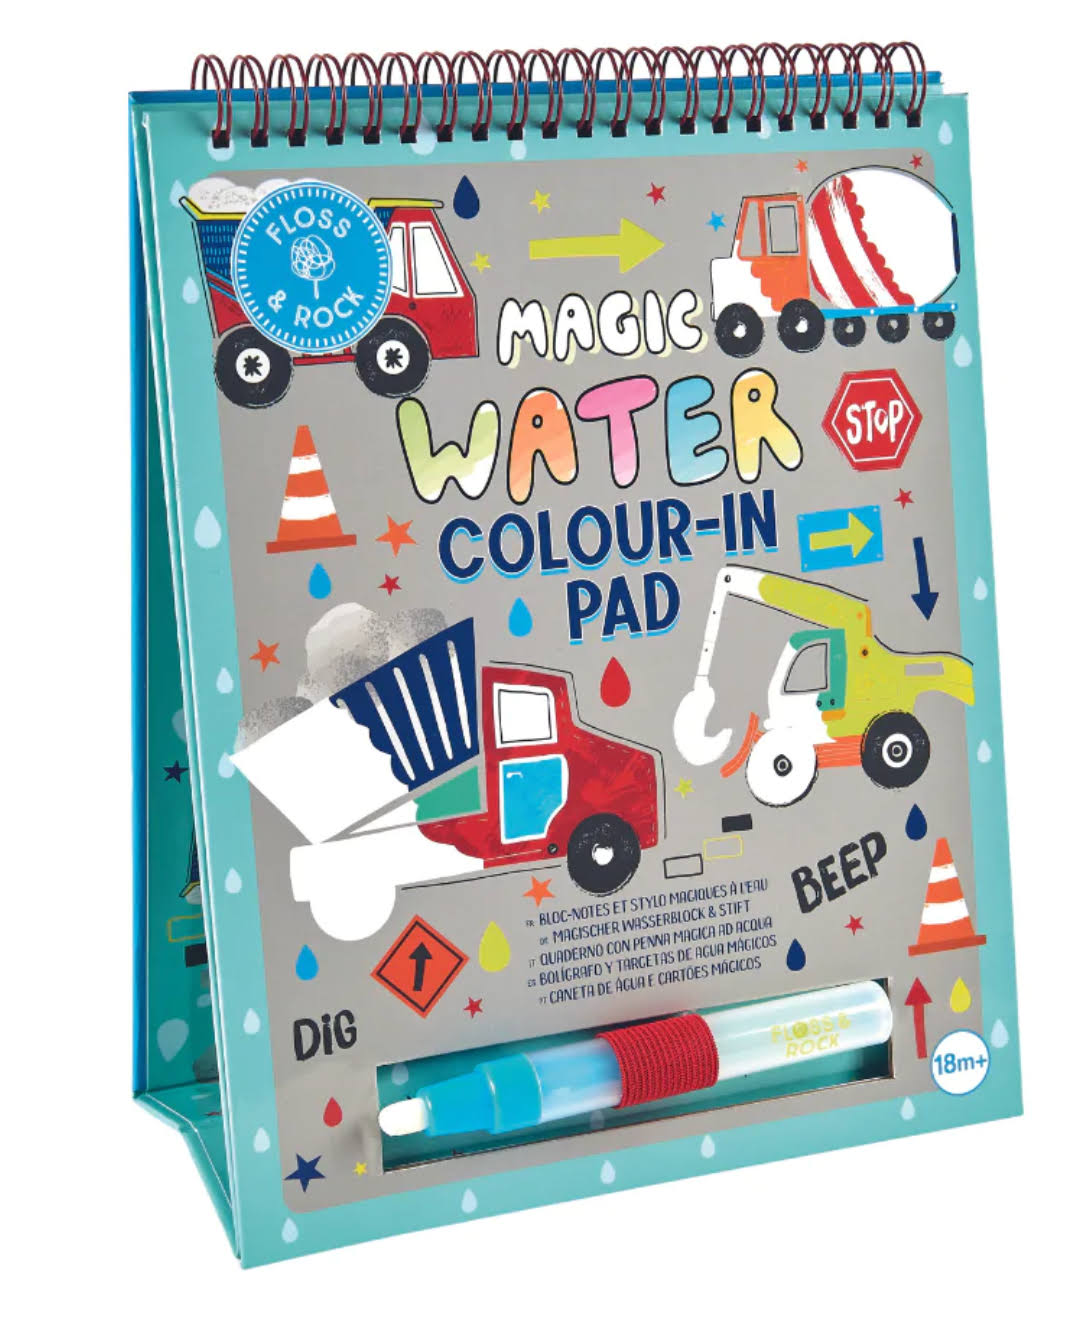 Floss & Rock Magic Easel Colour Changing Water Pad Construction